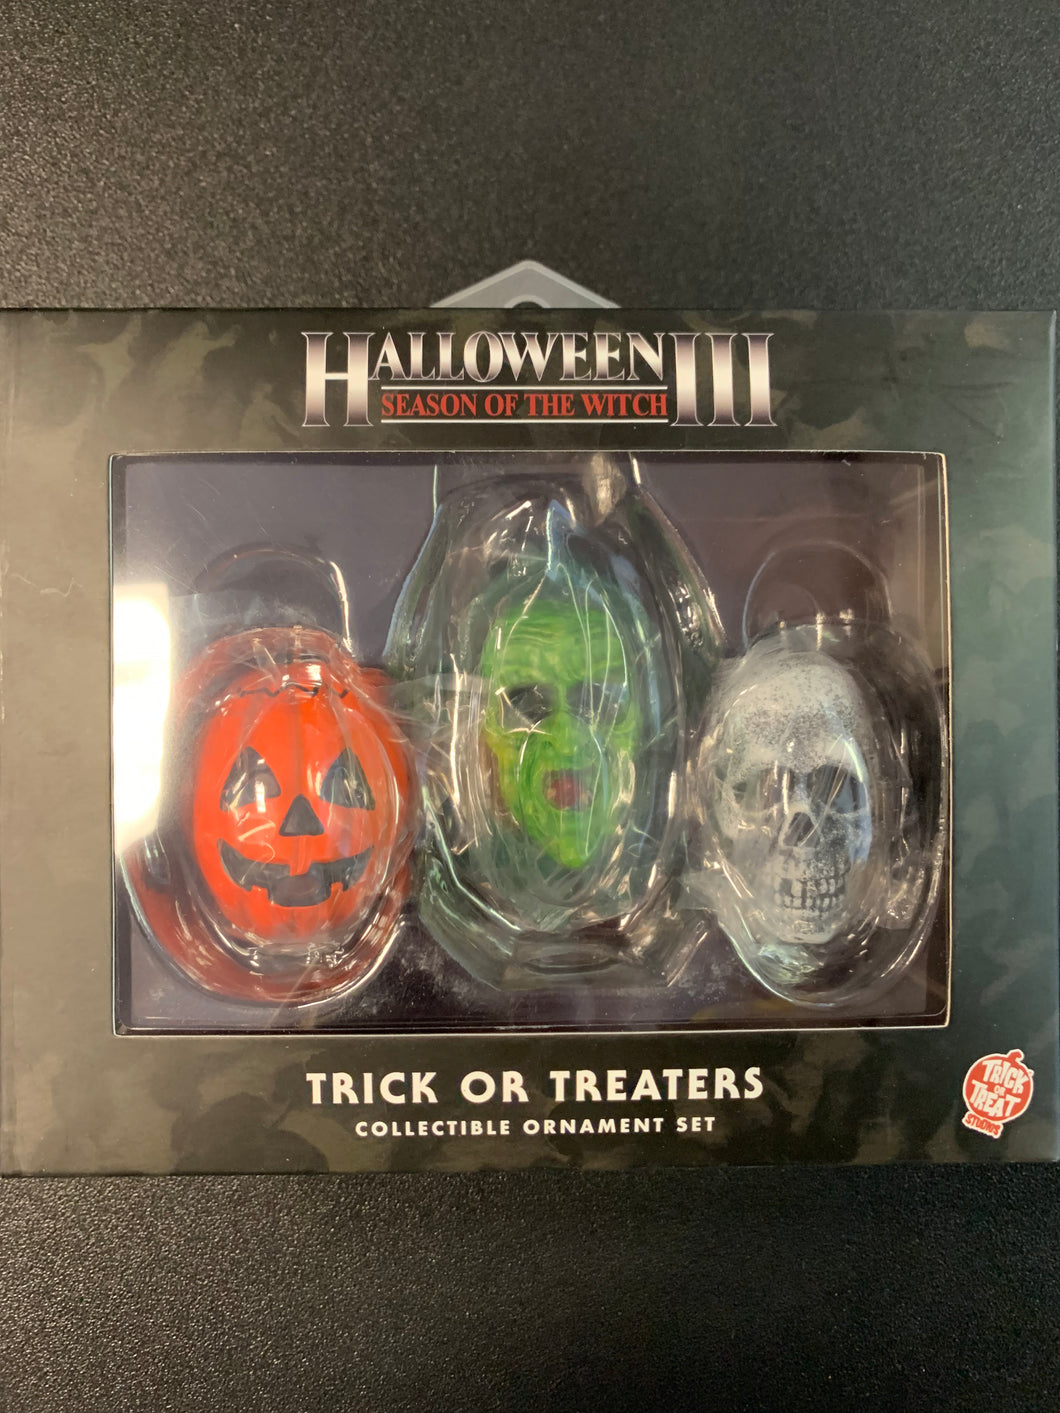 HOLIDAY HORRORS - HALLOWEEN III: SEASON OF THE WITCH - SILVER SHAMROCK ORNAMENT 3 PACK TRICK OR TREATERS SET